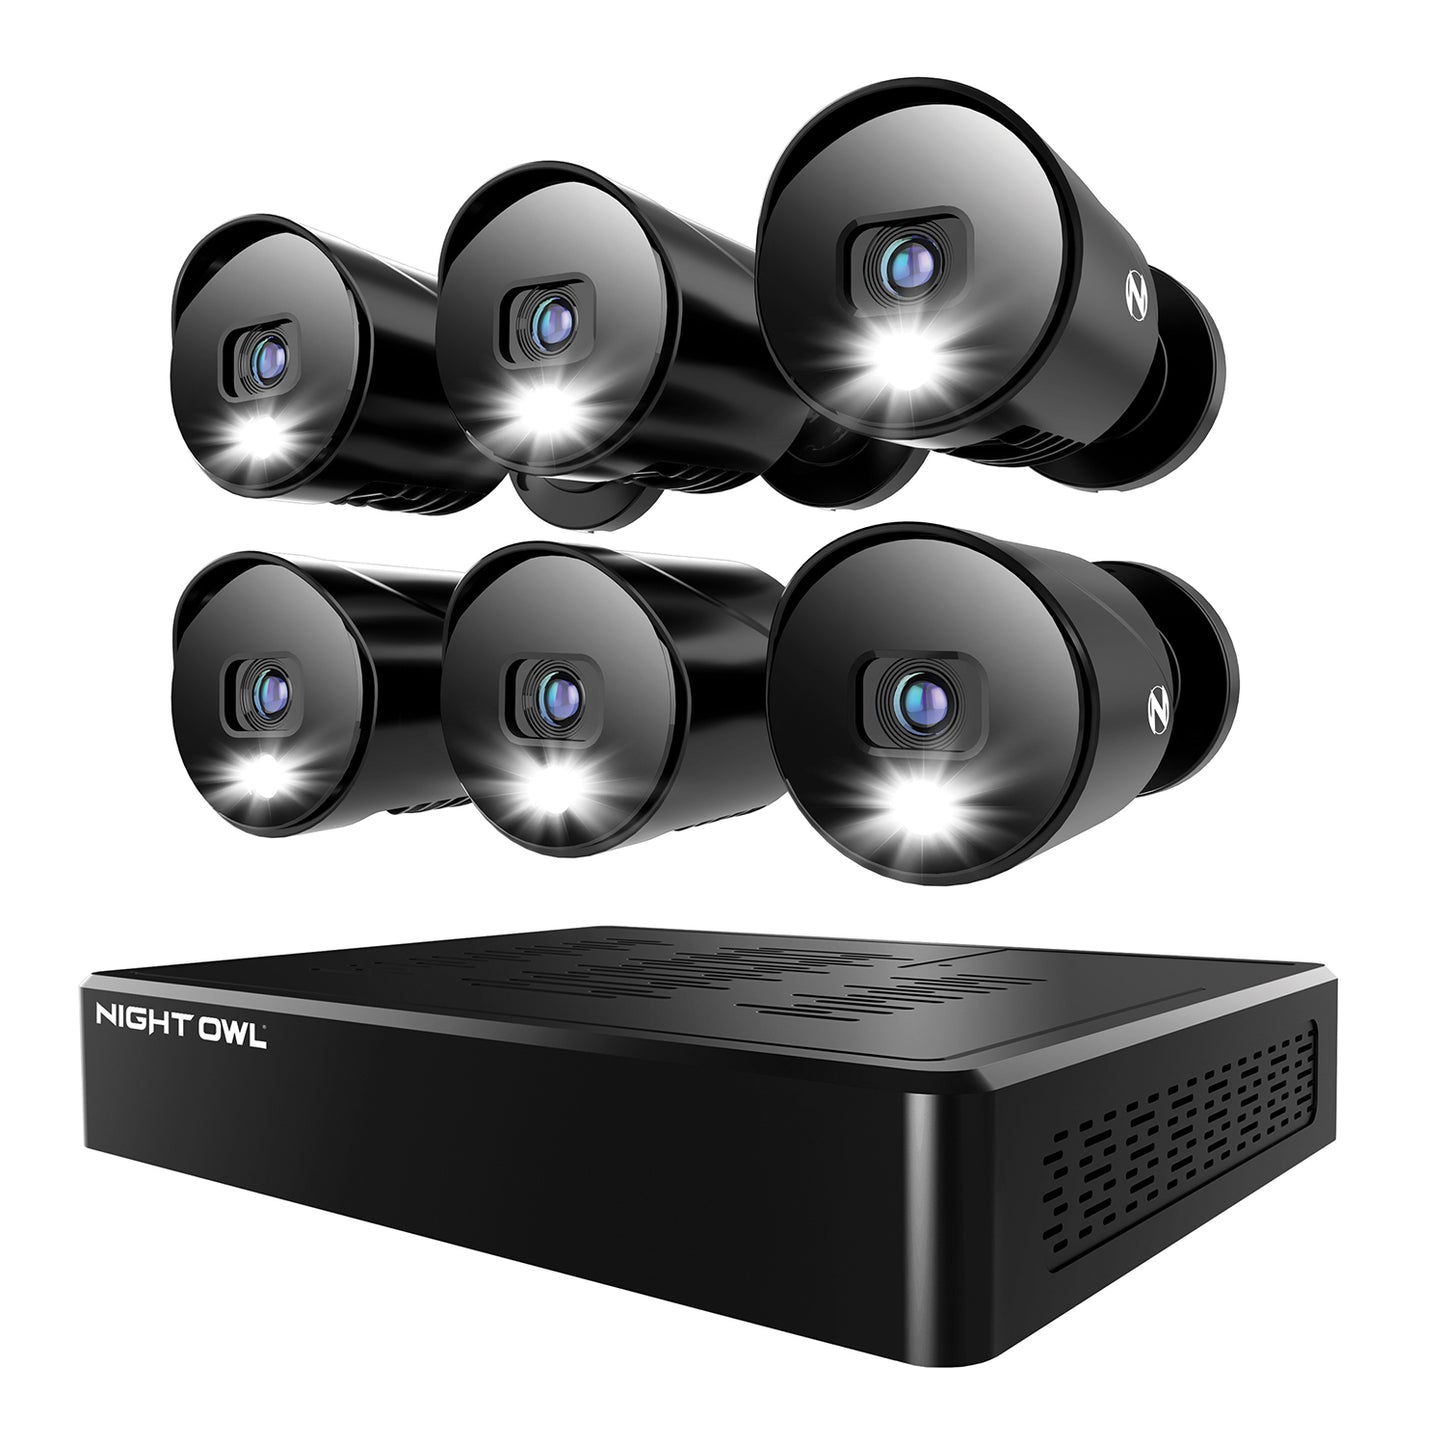 12 Channel DVR Security System with 1TB Hard Drive and 6 Wired 1080p Deterrence Cameras